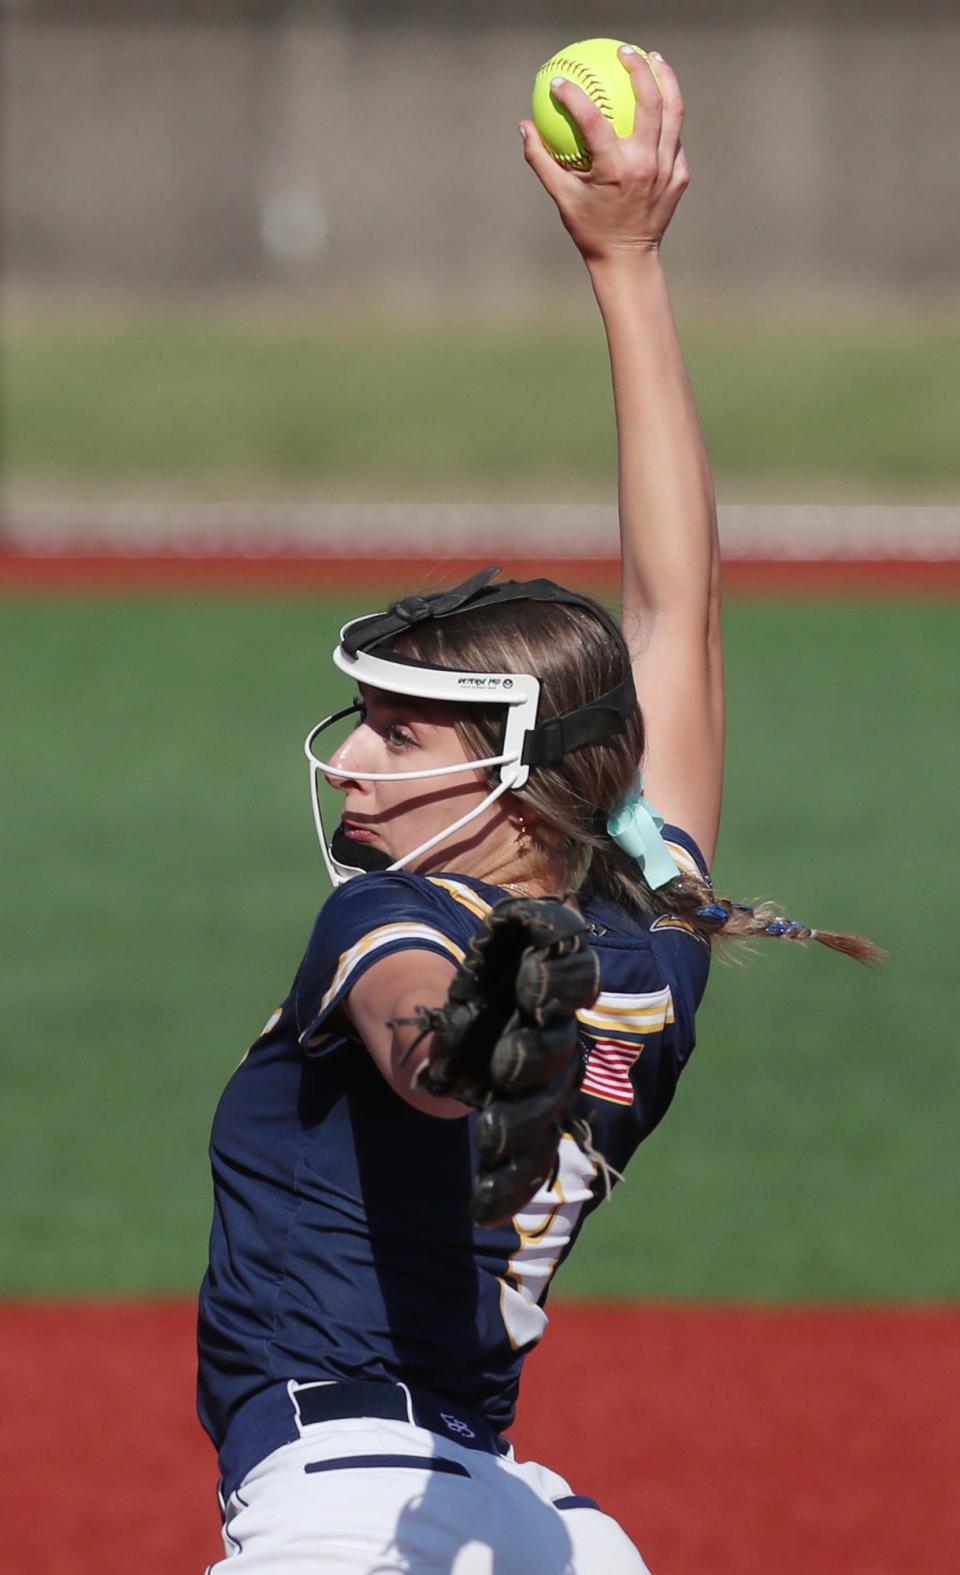 Tallmadge’s starting pitcher Riley Jackson delivers a pitch against Greenville in the Div. II state semifinal softball at Firestone Stadium in Akron.